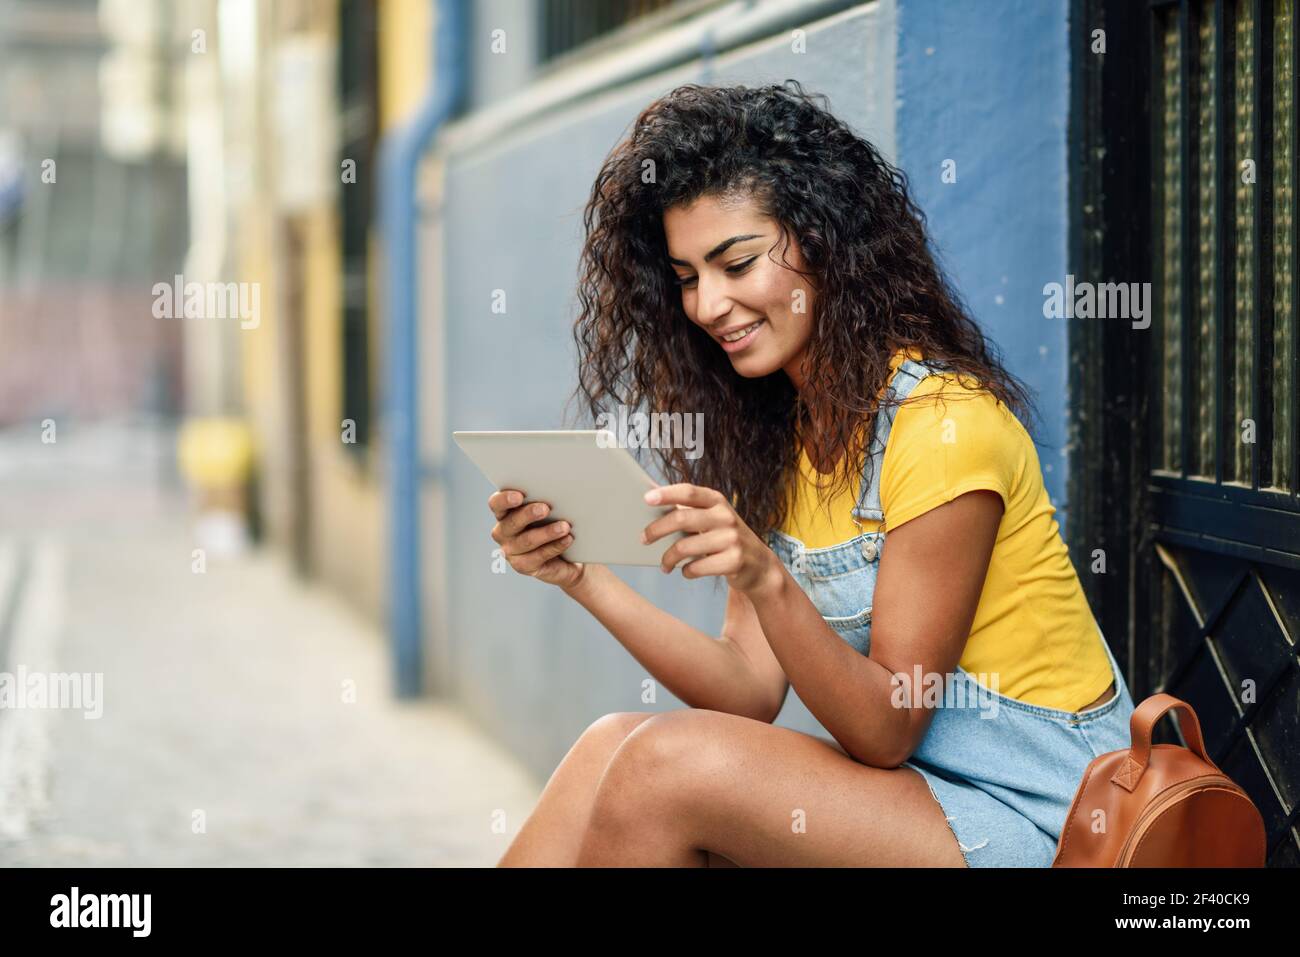 Young Arab woman looking at her digital tablet outdoors. African girl wearing casual clothes inurban background. Curly hairstyle. Stock Photo